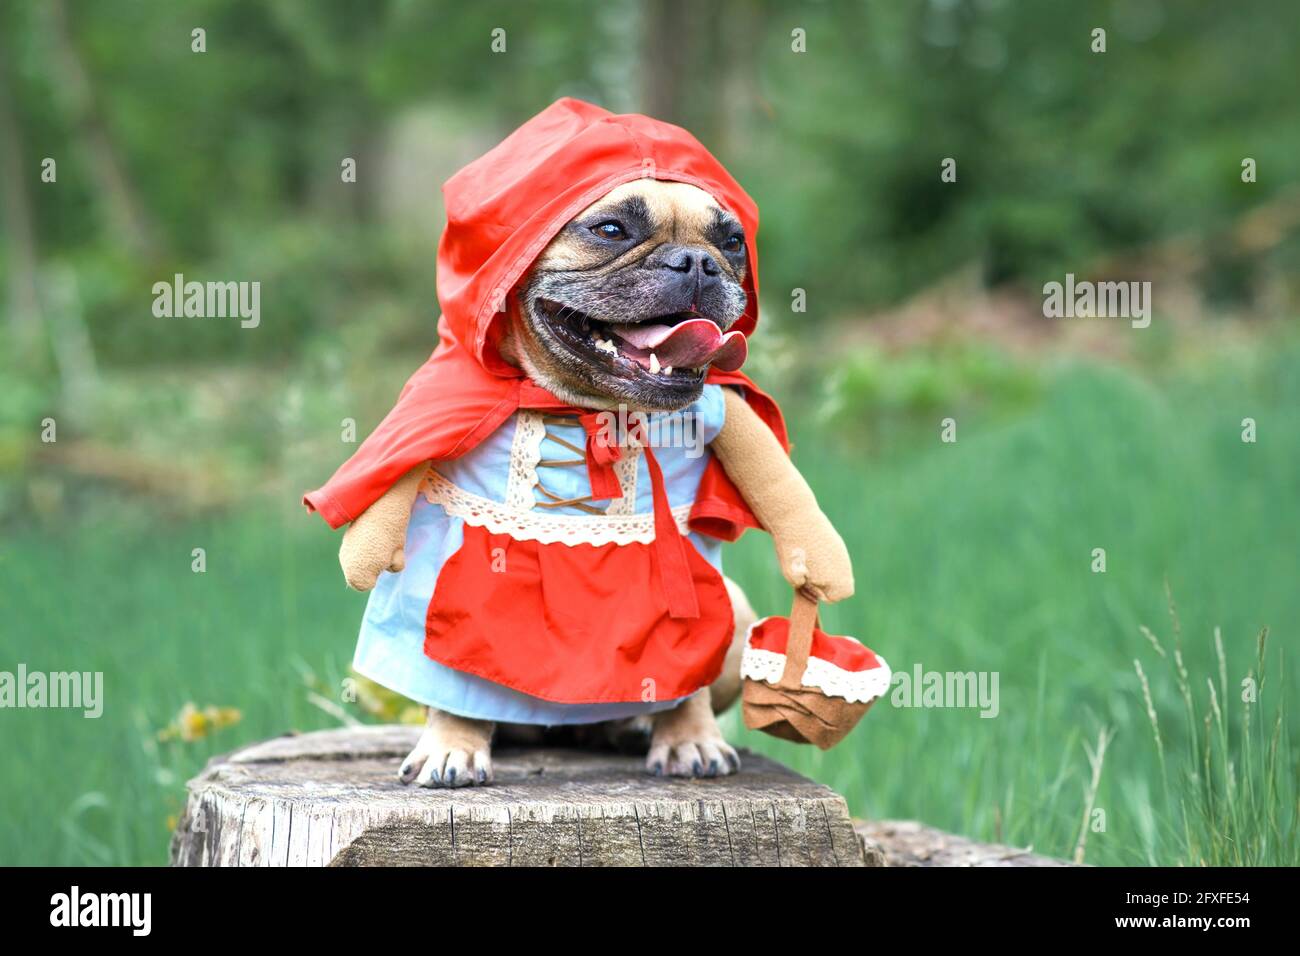 Funny French Bulldog dos dressed up as fairytale character Little Red  Riding Hood with full body costumes with fake arms wearing basket in forest  Stock Photo - Alamy